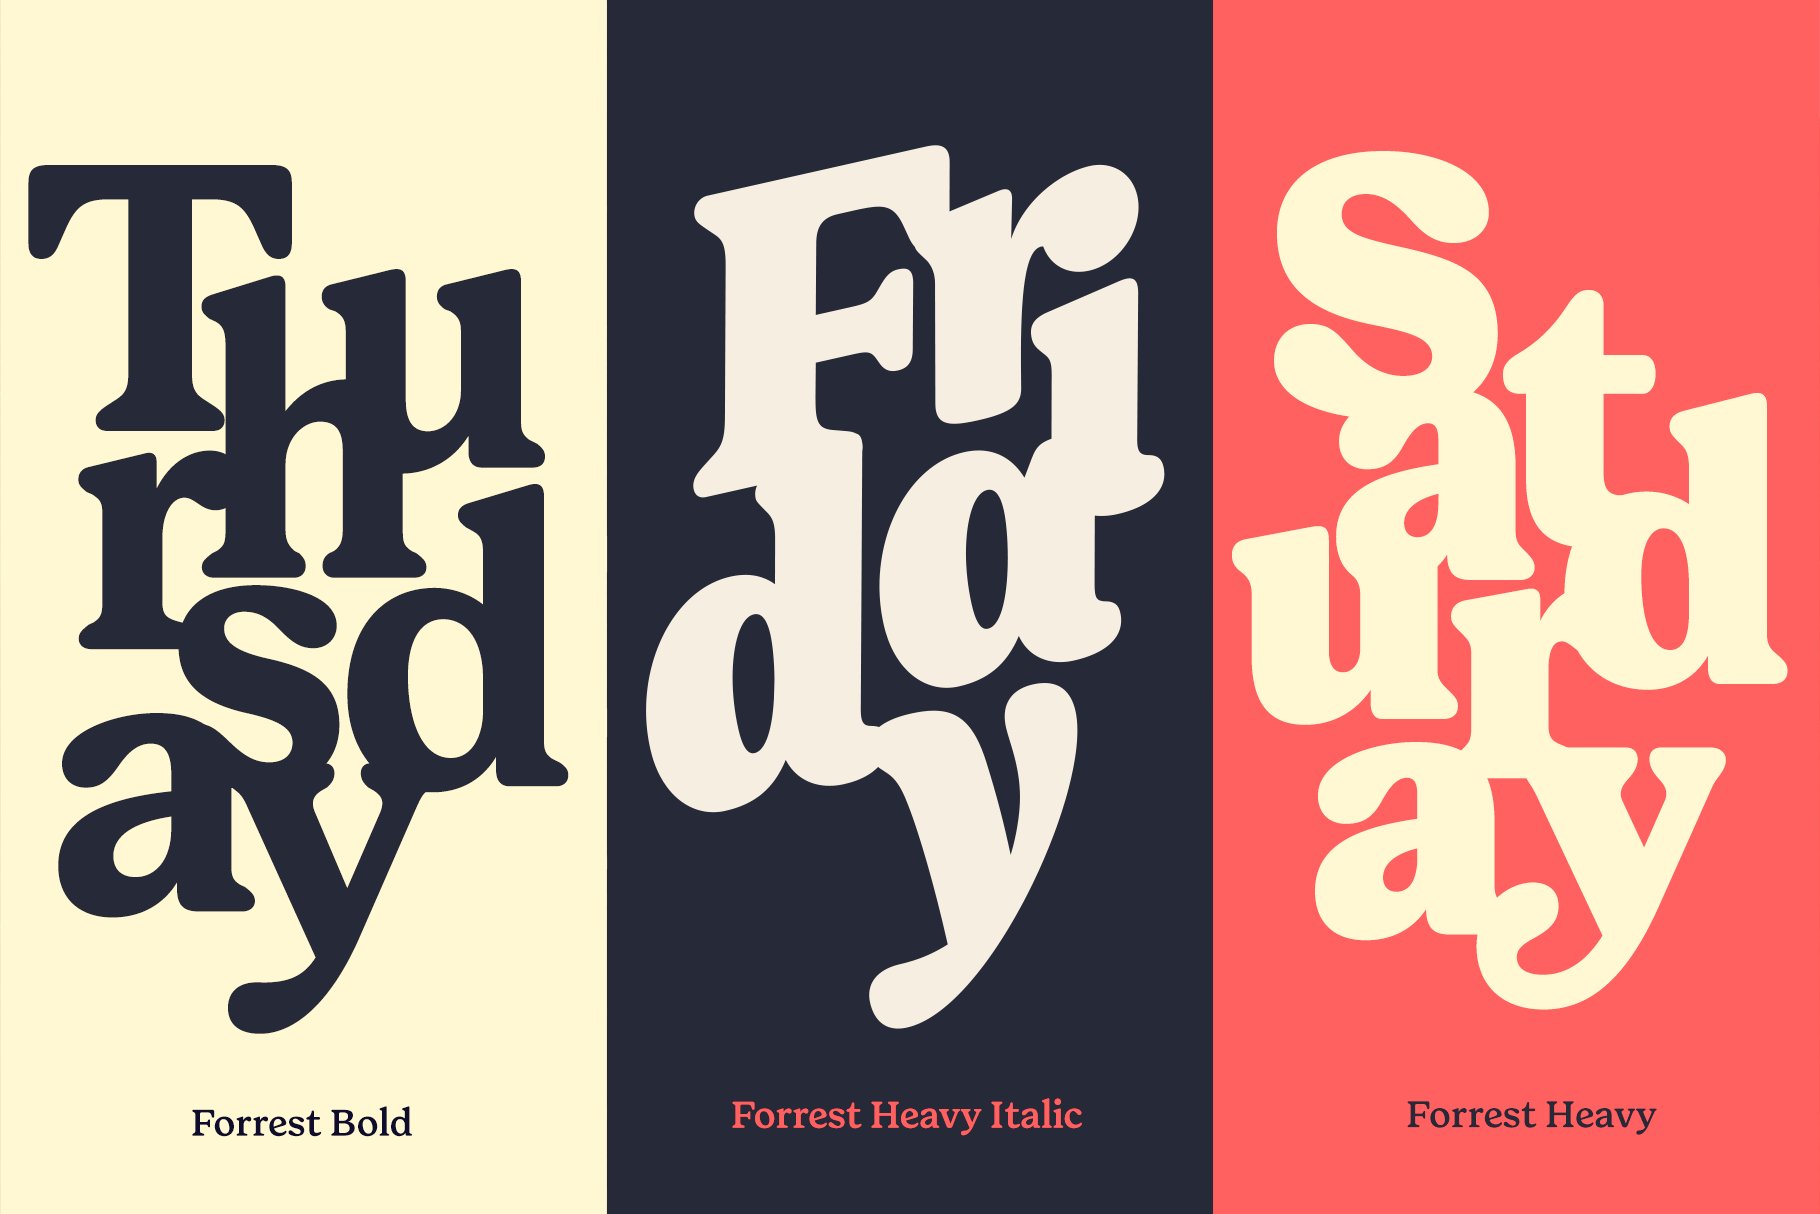 Forrest Friendly Serif Familypreview image.